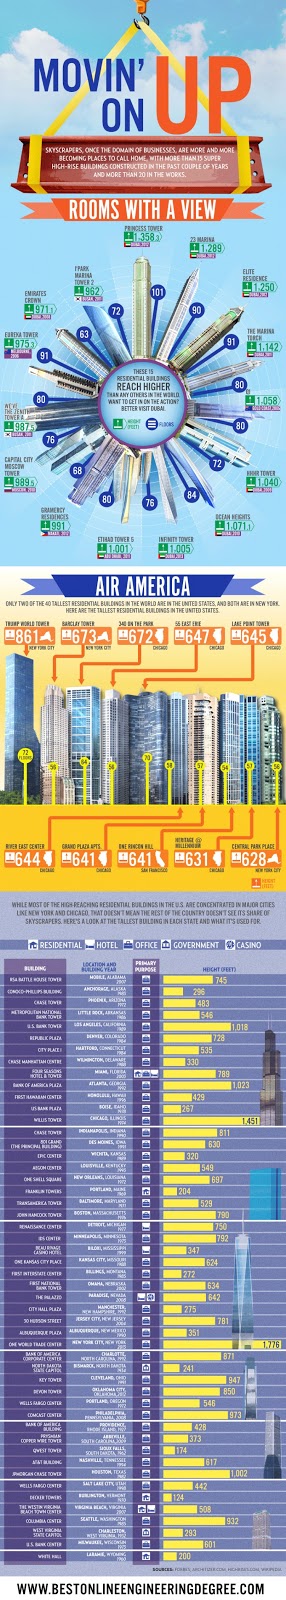 Worlds Tallest Buildings infographic